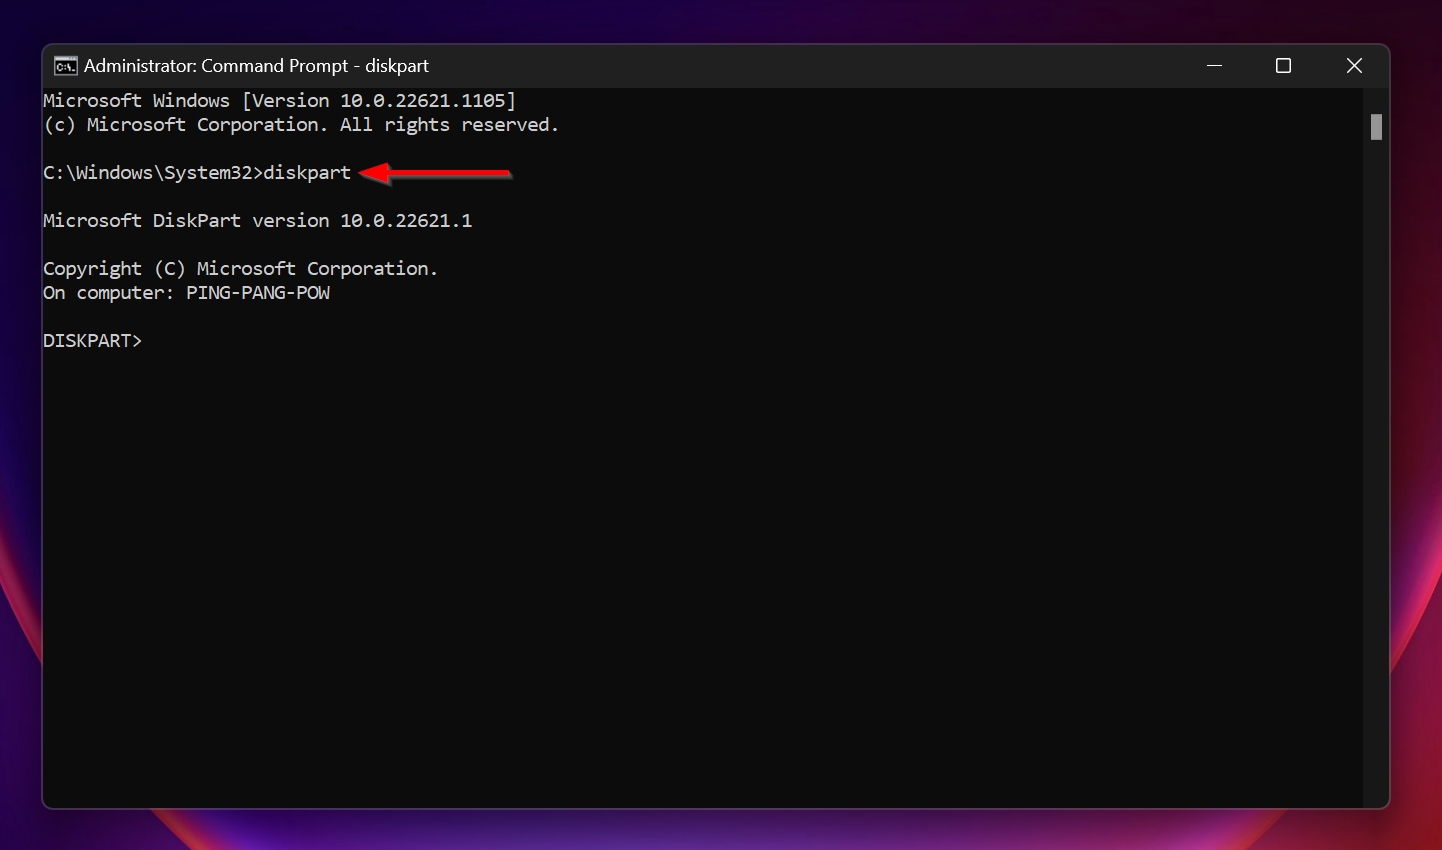 The diskpart command in Windows Command Prompt.